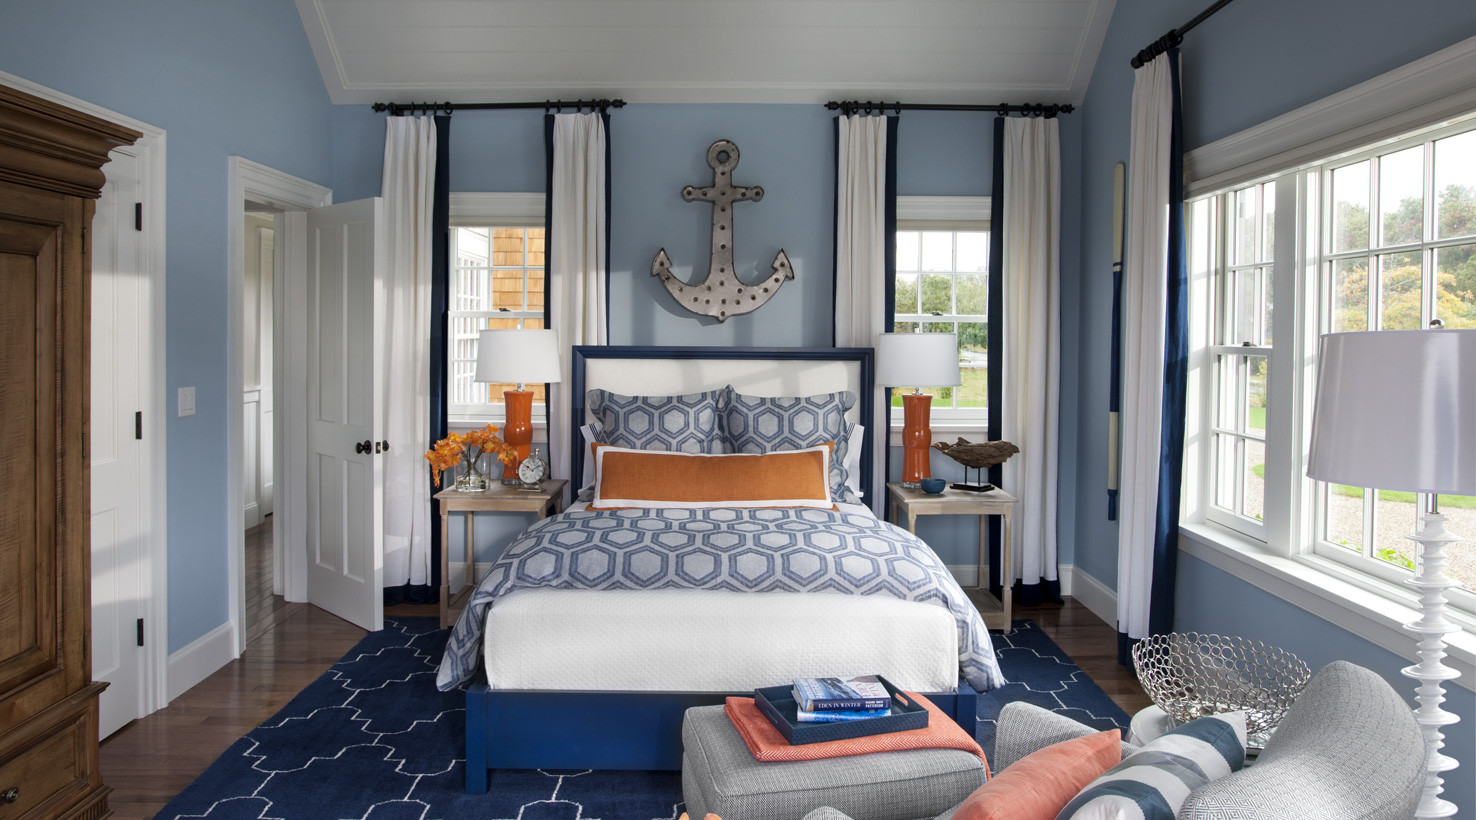 Sherwin Williams Bedroom Colors
 HGTV Dream Home 2015 The Look HGTV Sponsored By